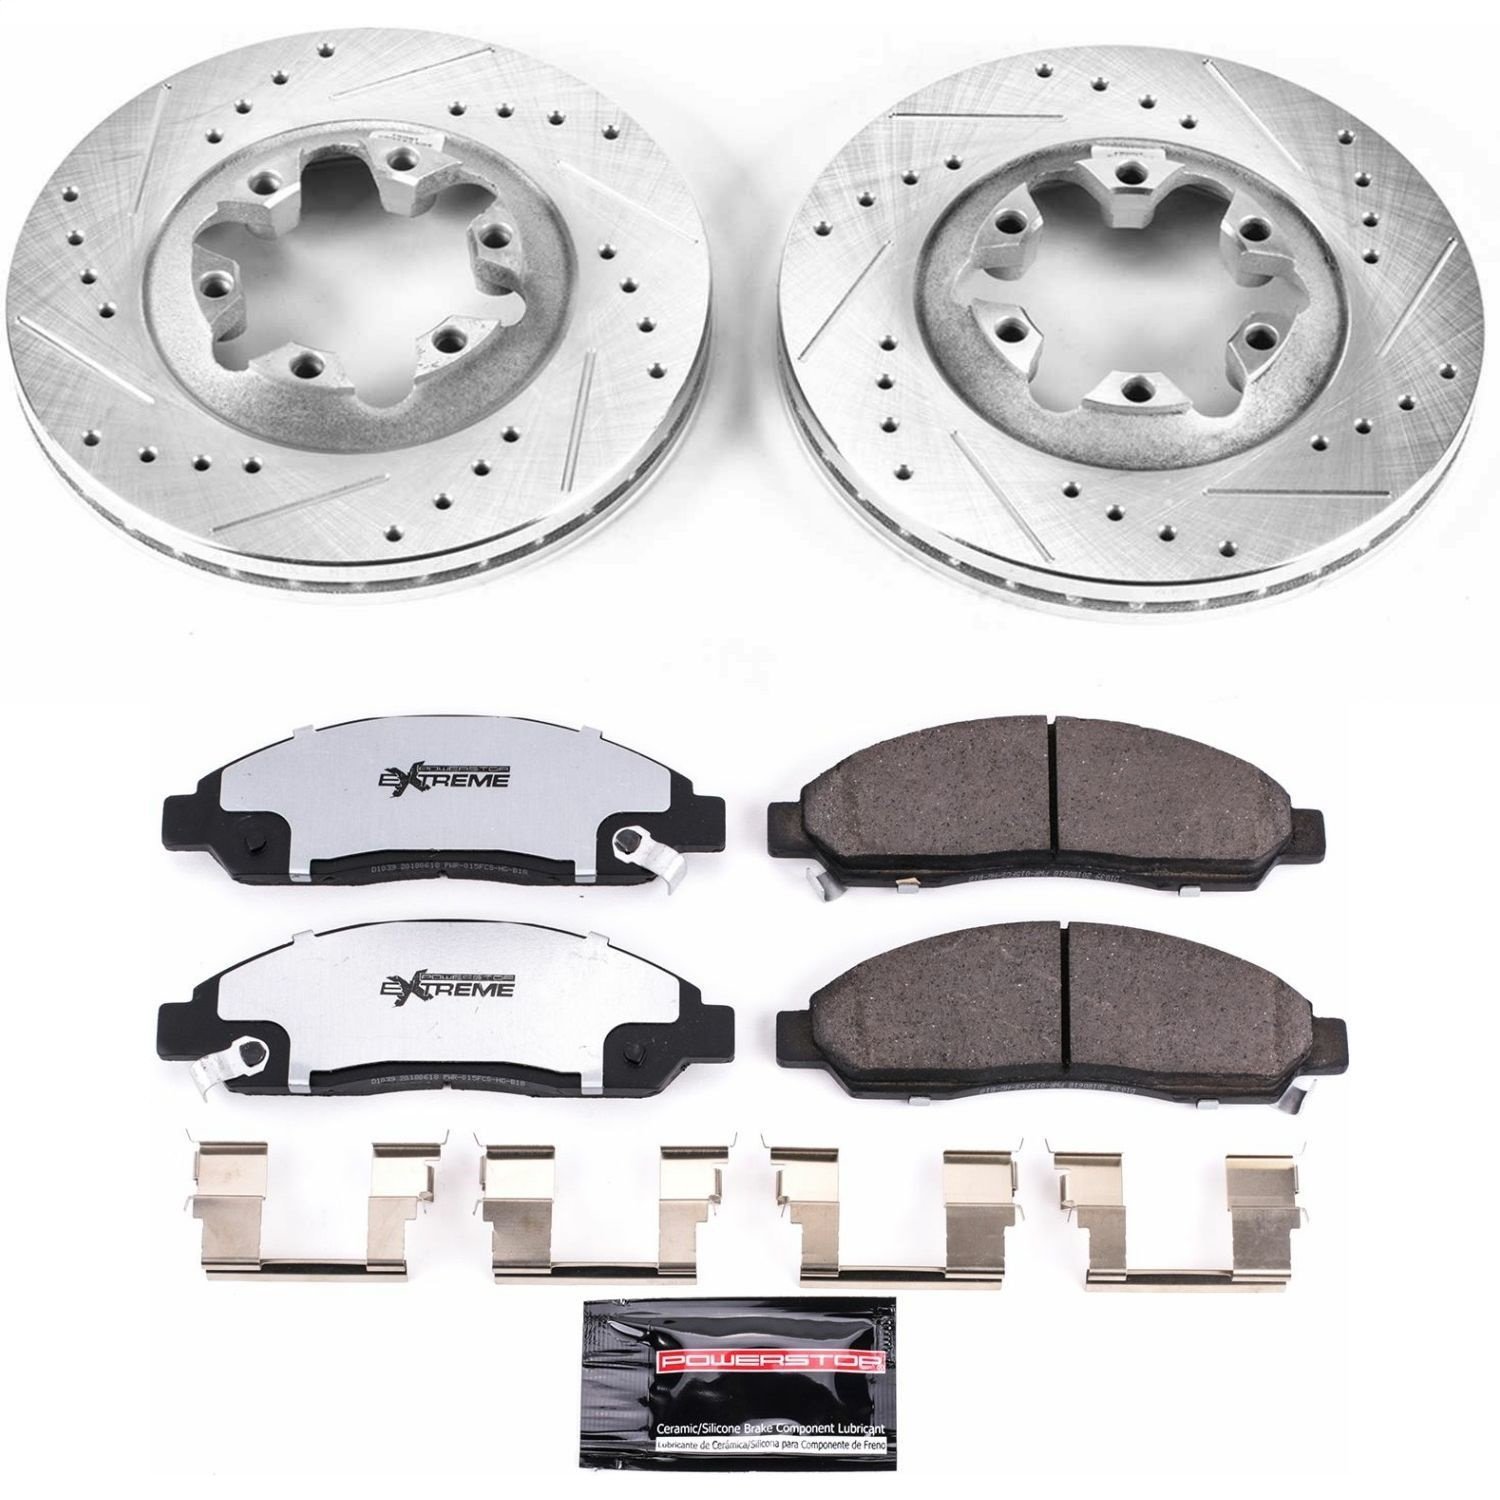 Heavy Duty Truck And Tow Brake Kit